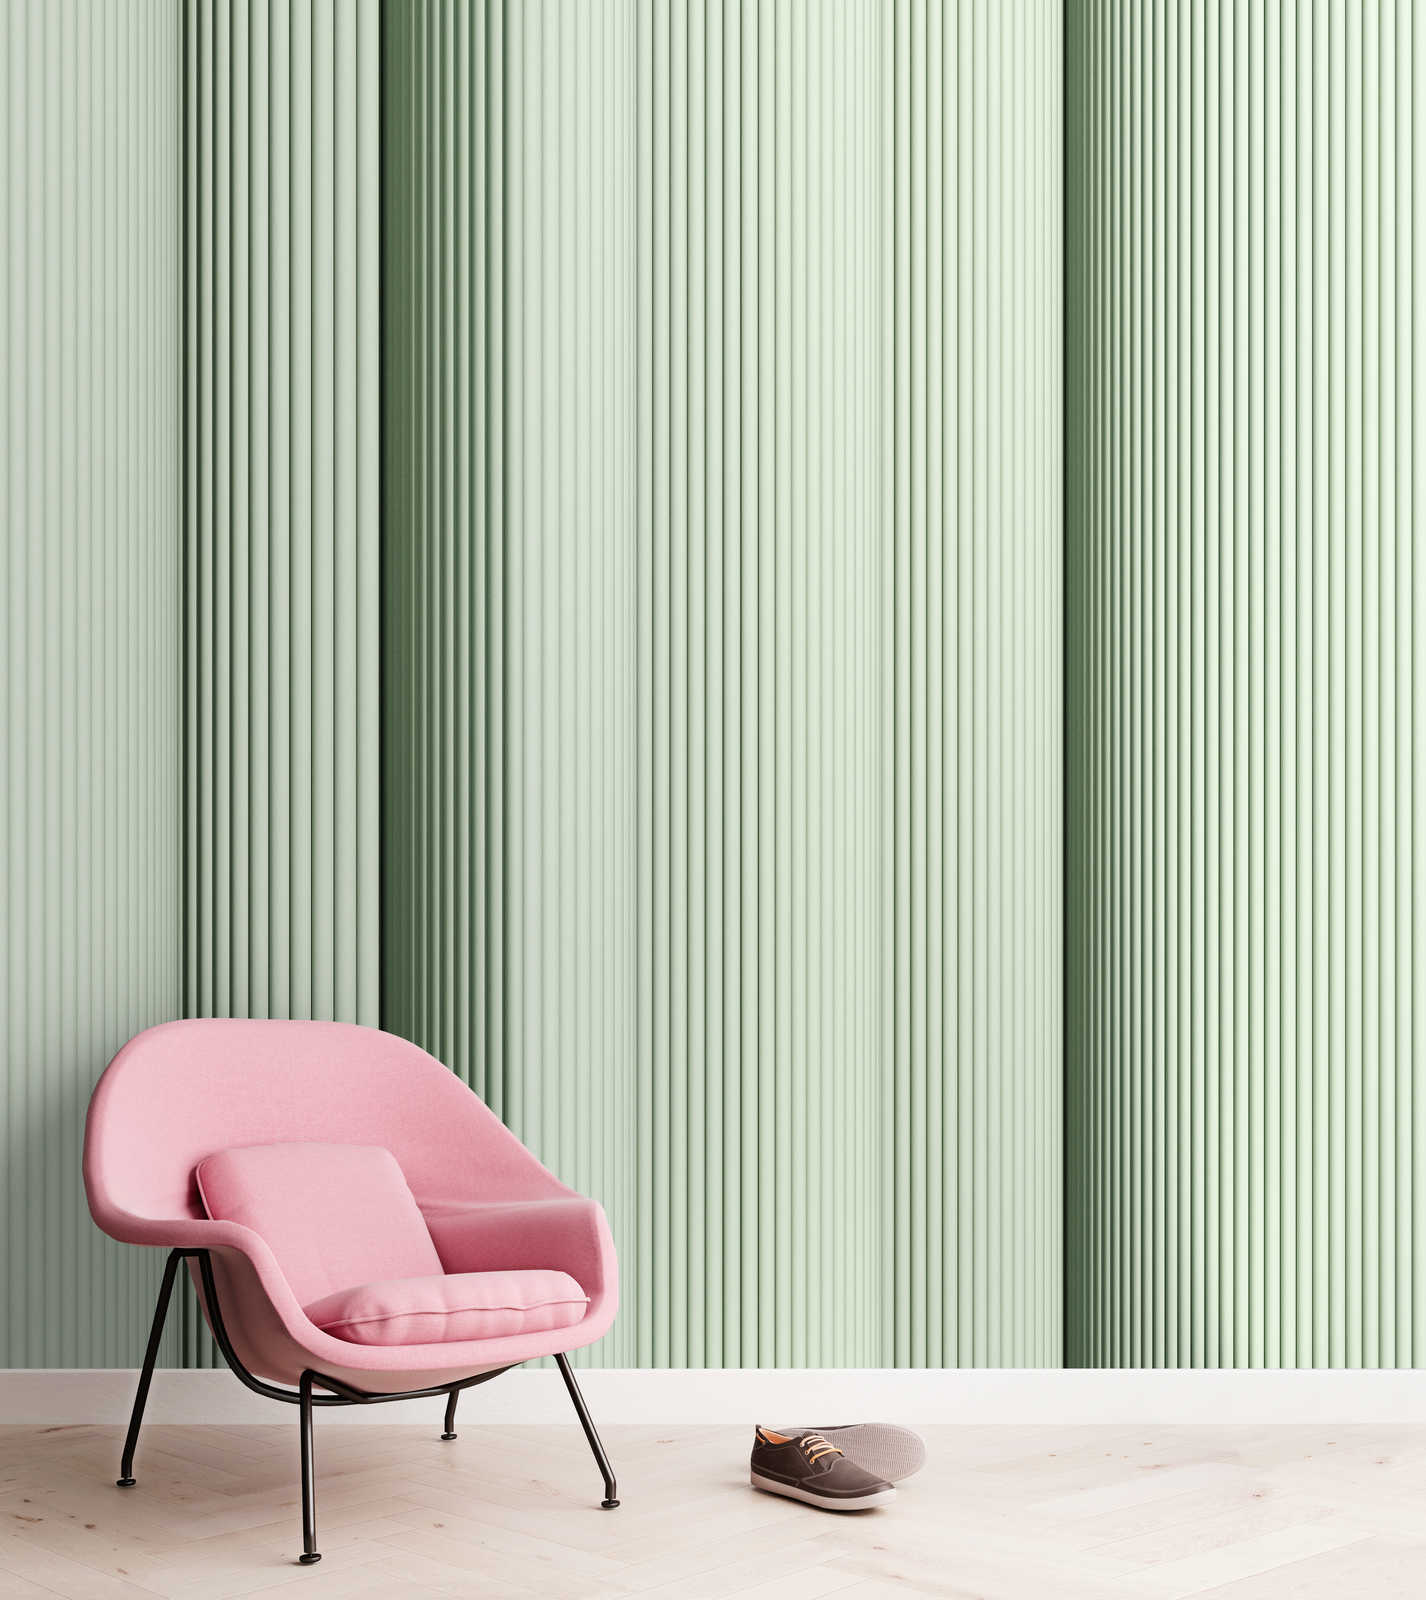             Magic Wall 2 - Green stripes mural with 3D illusion effect
        